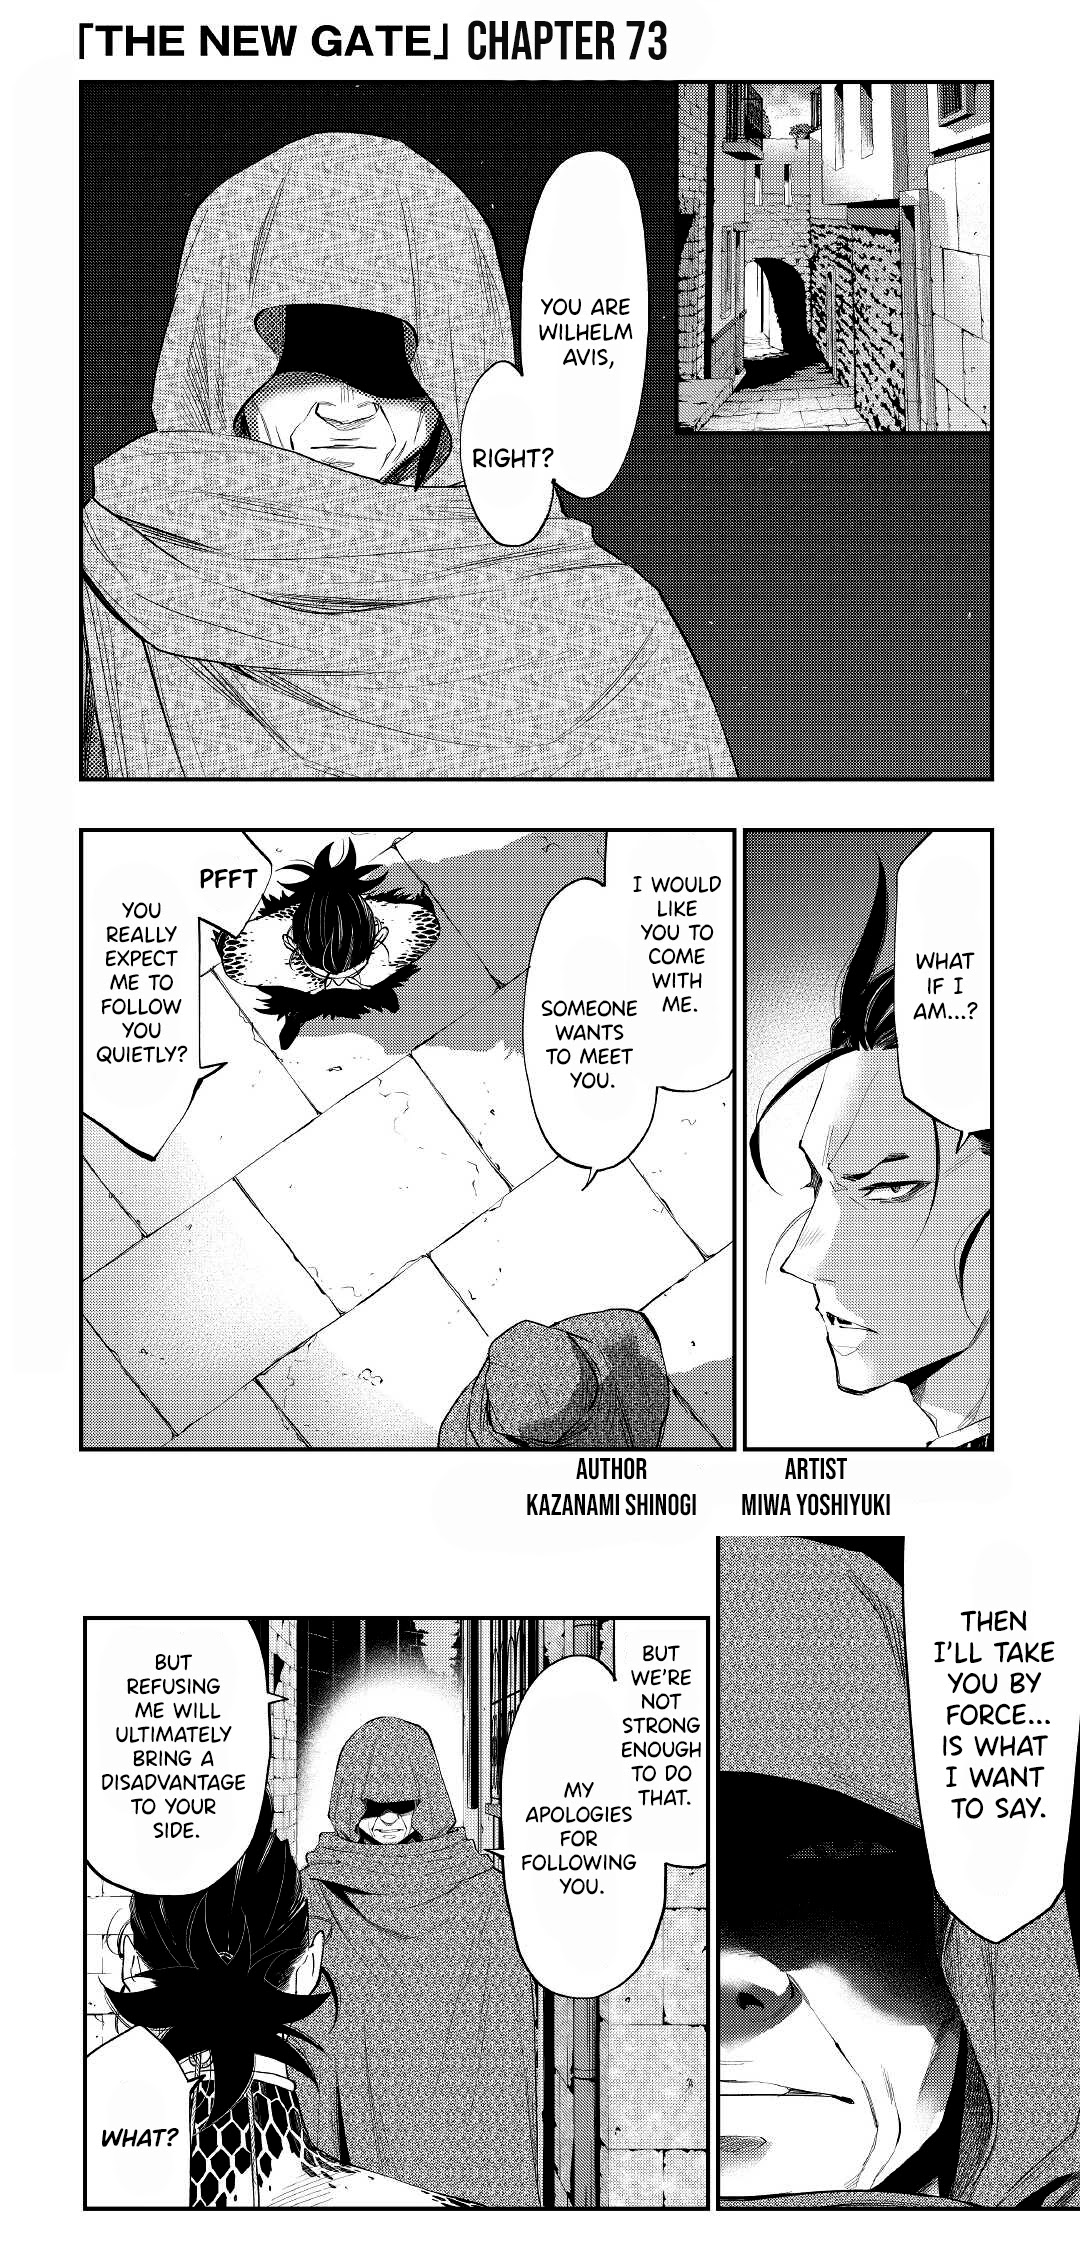 The New Gate Chapter 73 #1